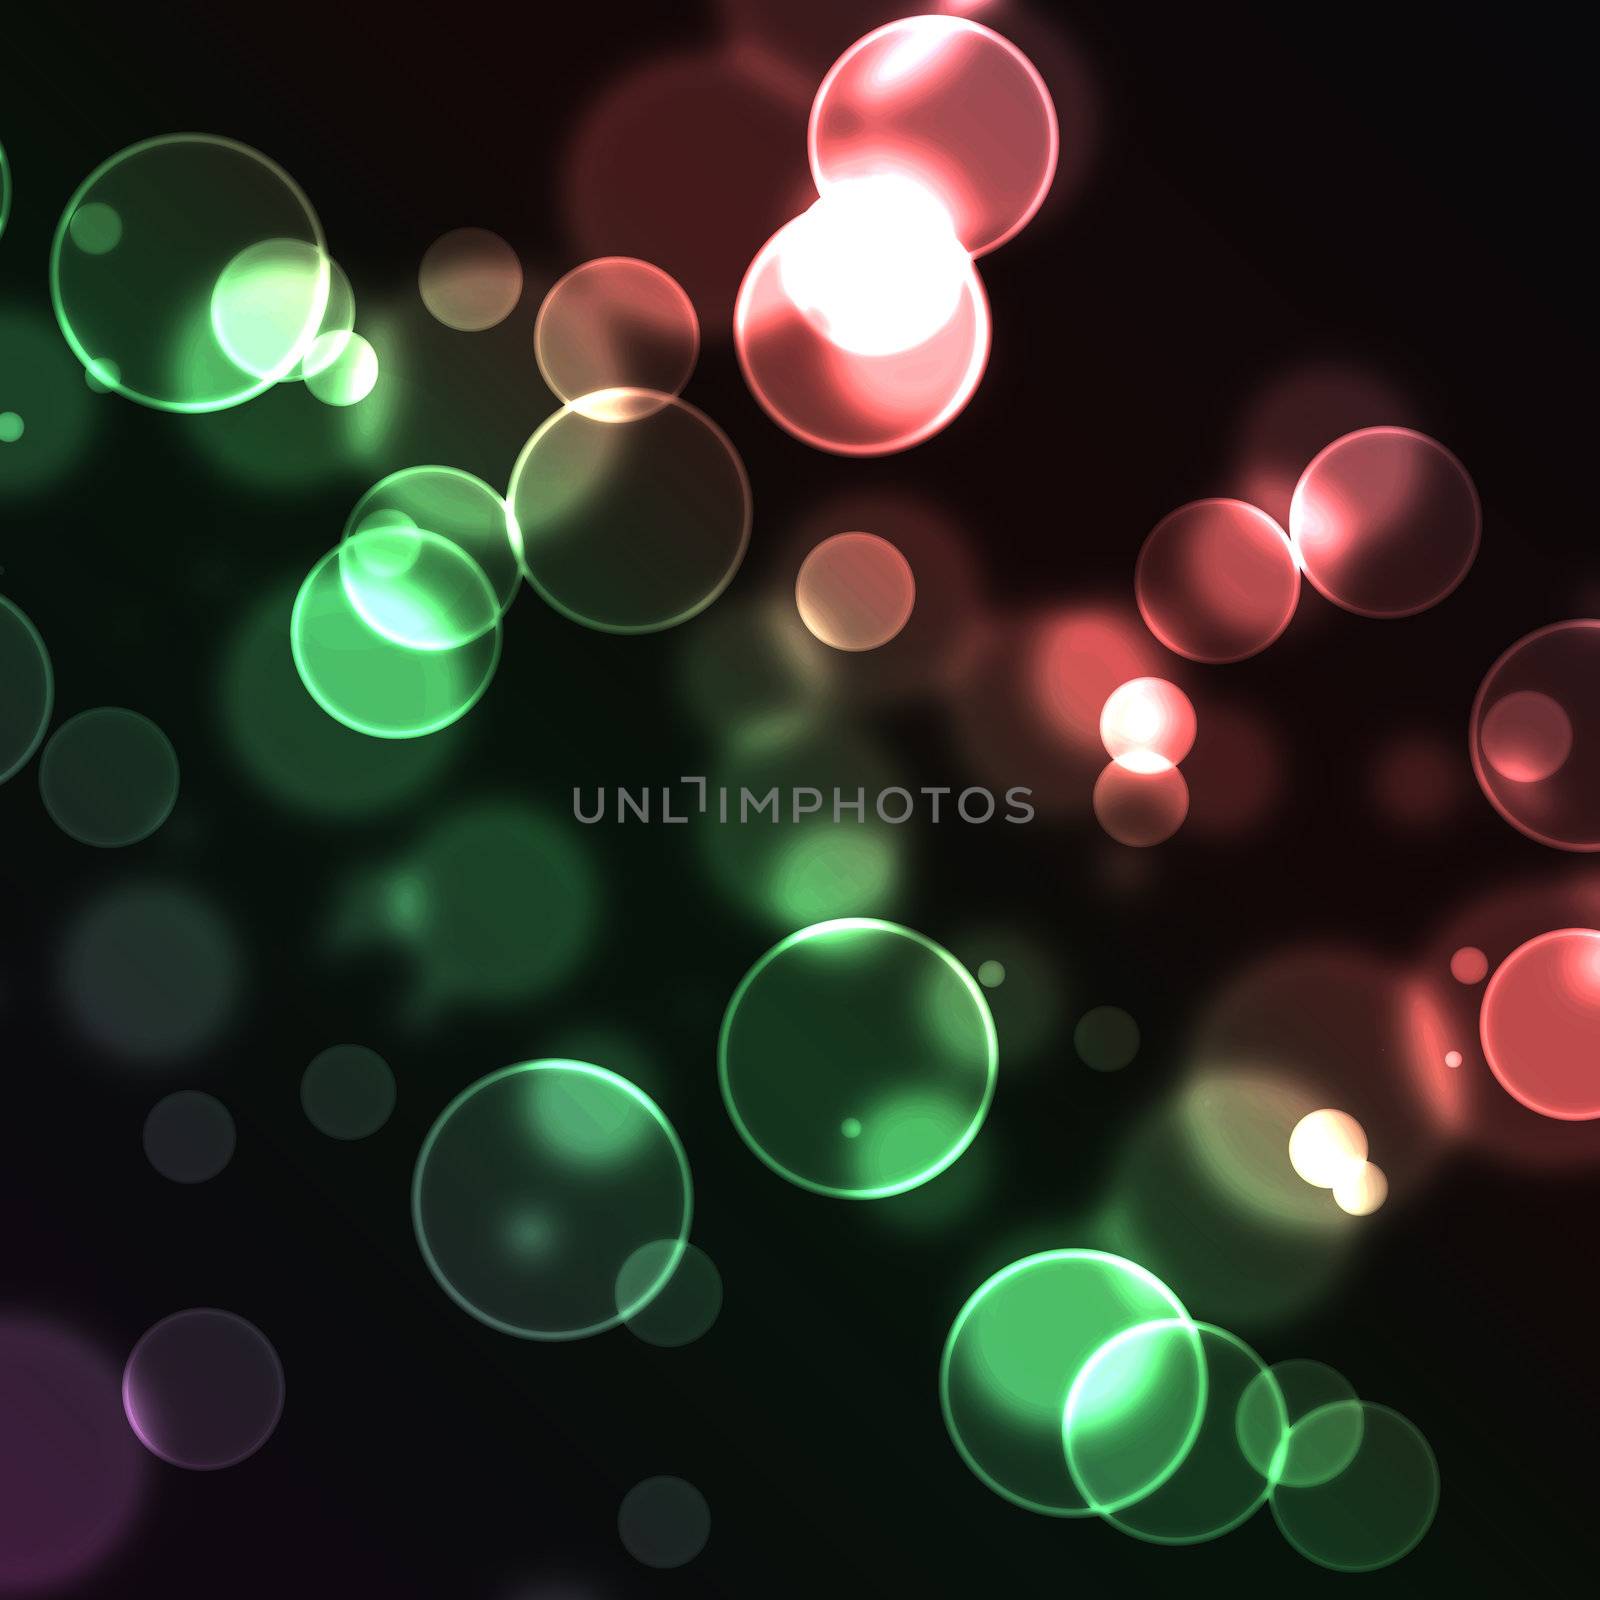 Red and green bubbles against a black background